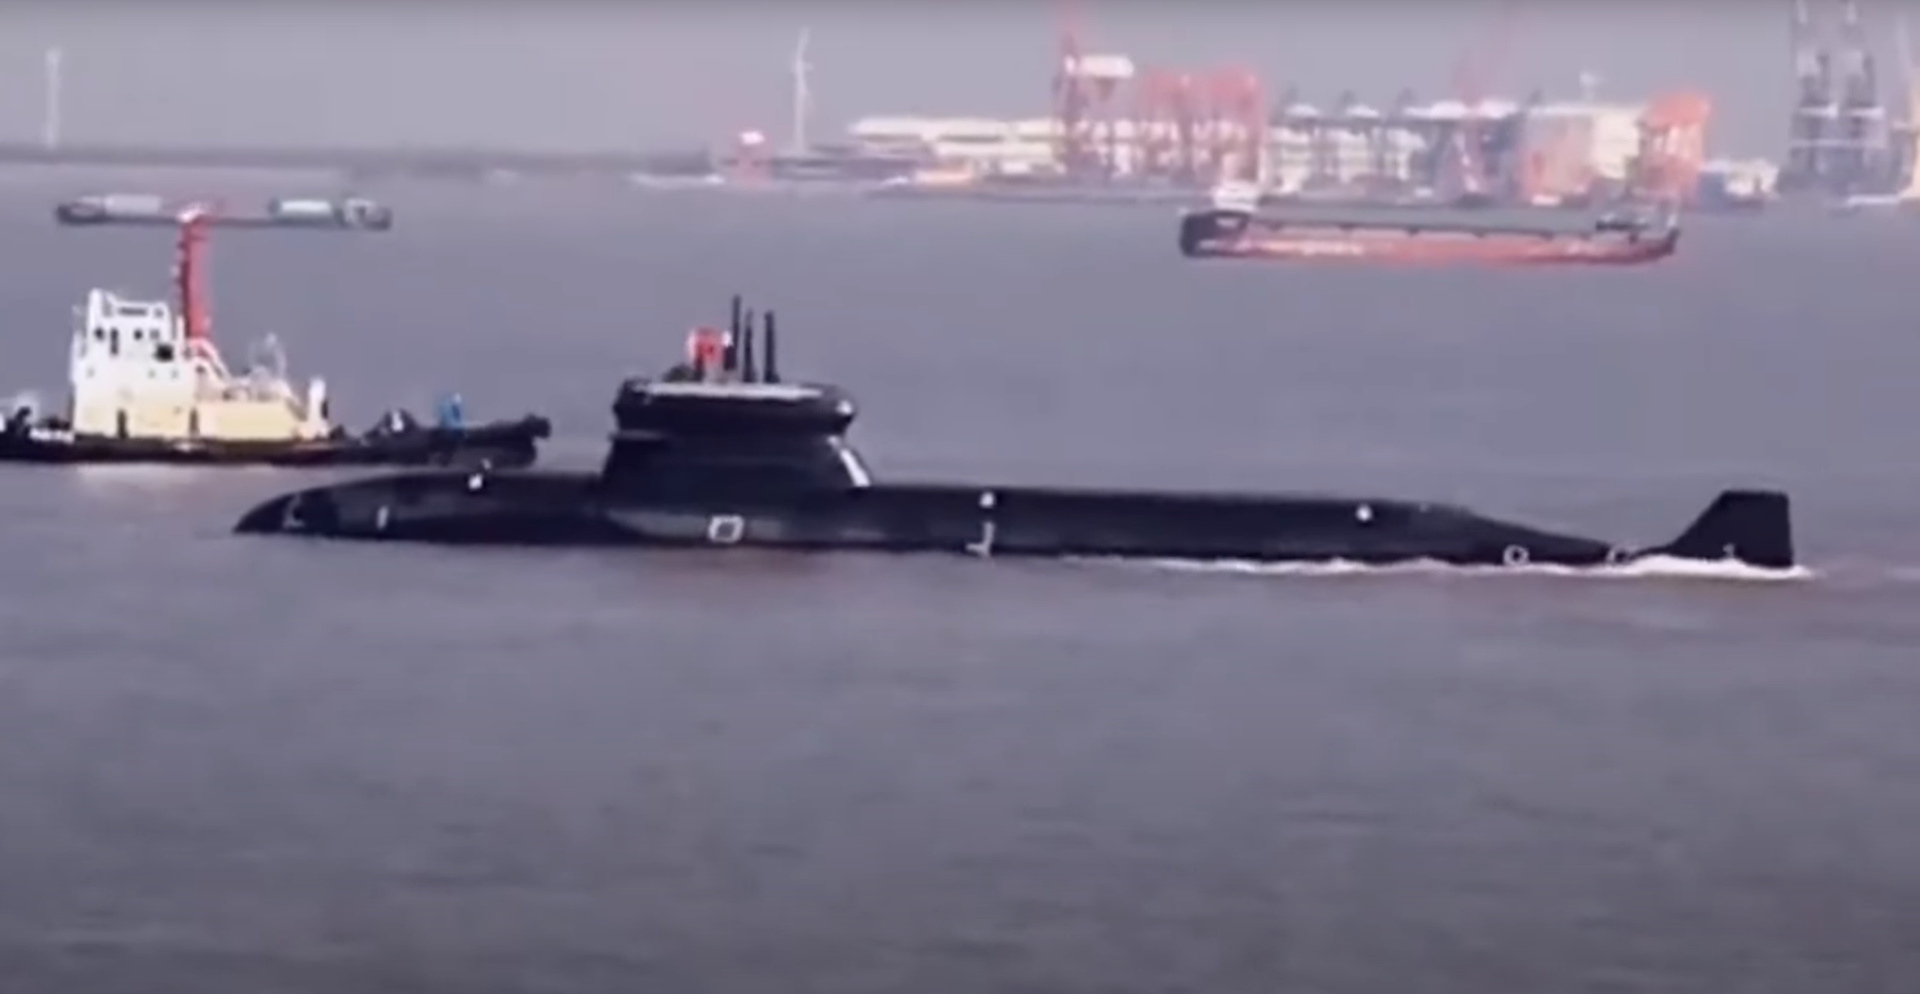 Footage of what seems to be a new variant of China's Type 039 attack submarine near Shanghai posted on social media in 2021. - Sputnik International, 1920, 22.07.2022